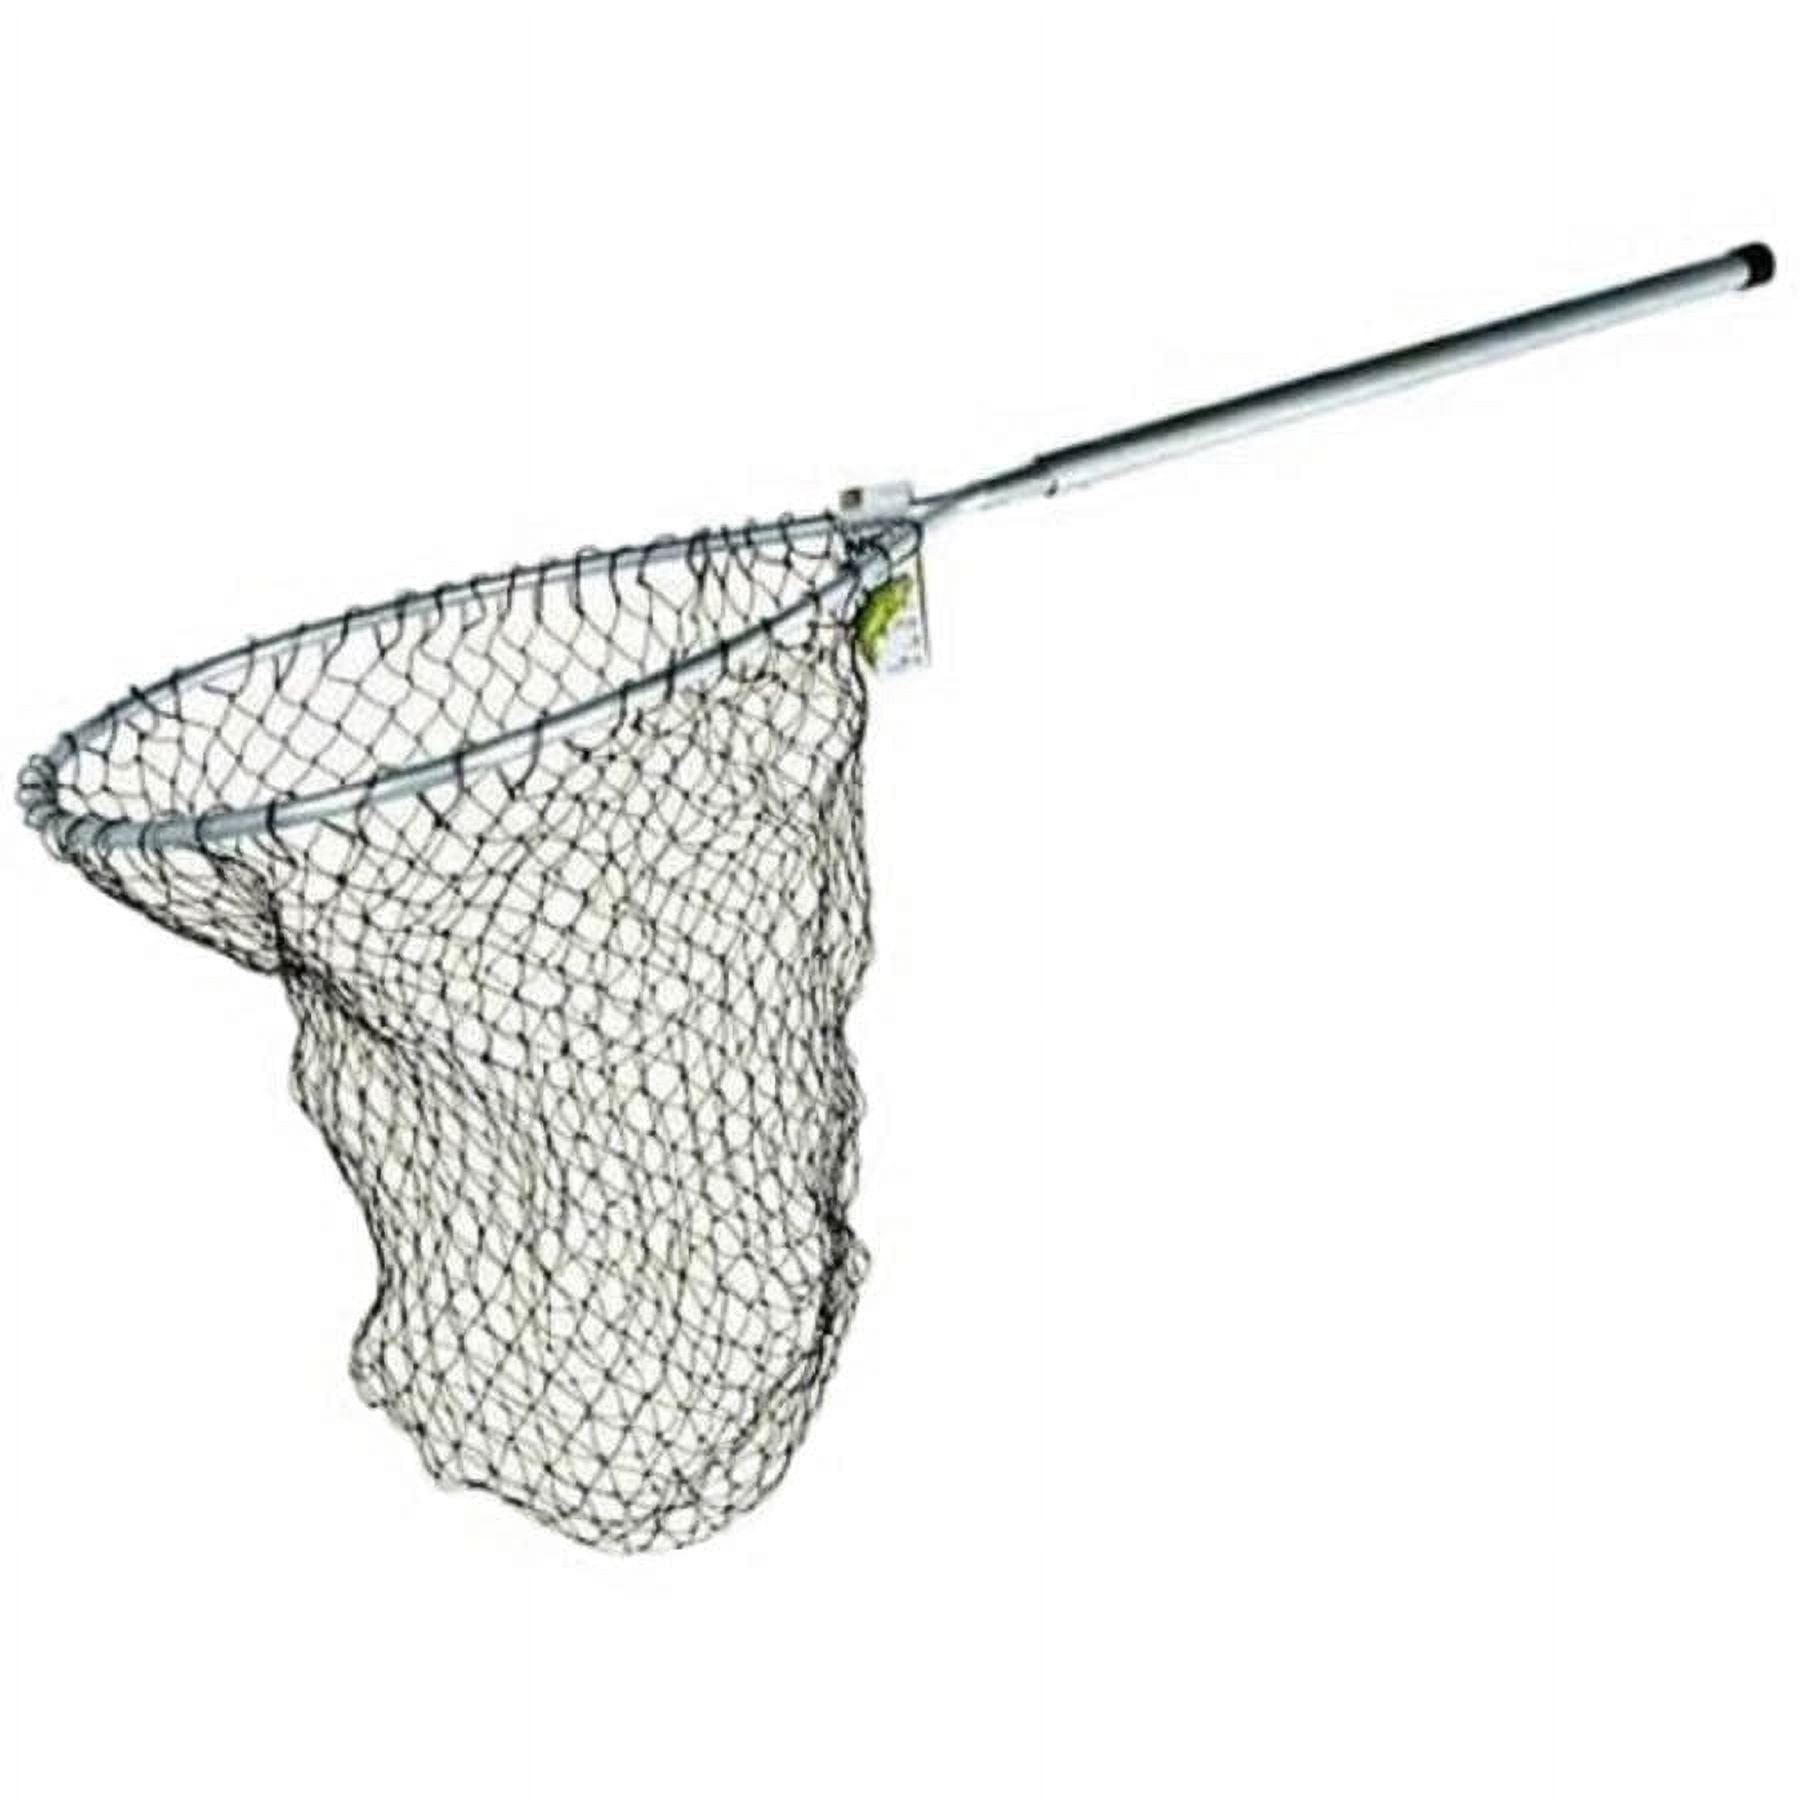 Danielson Knotless Landing Net with 26-44 Slide Handle, 6 x 22 